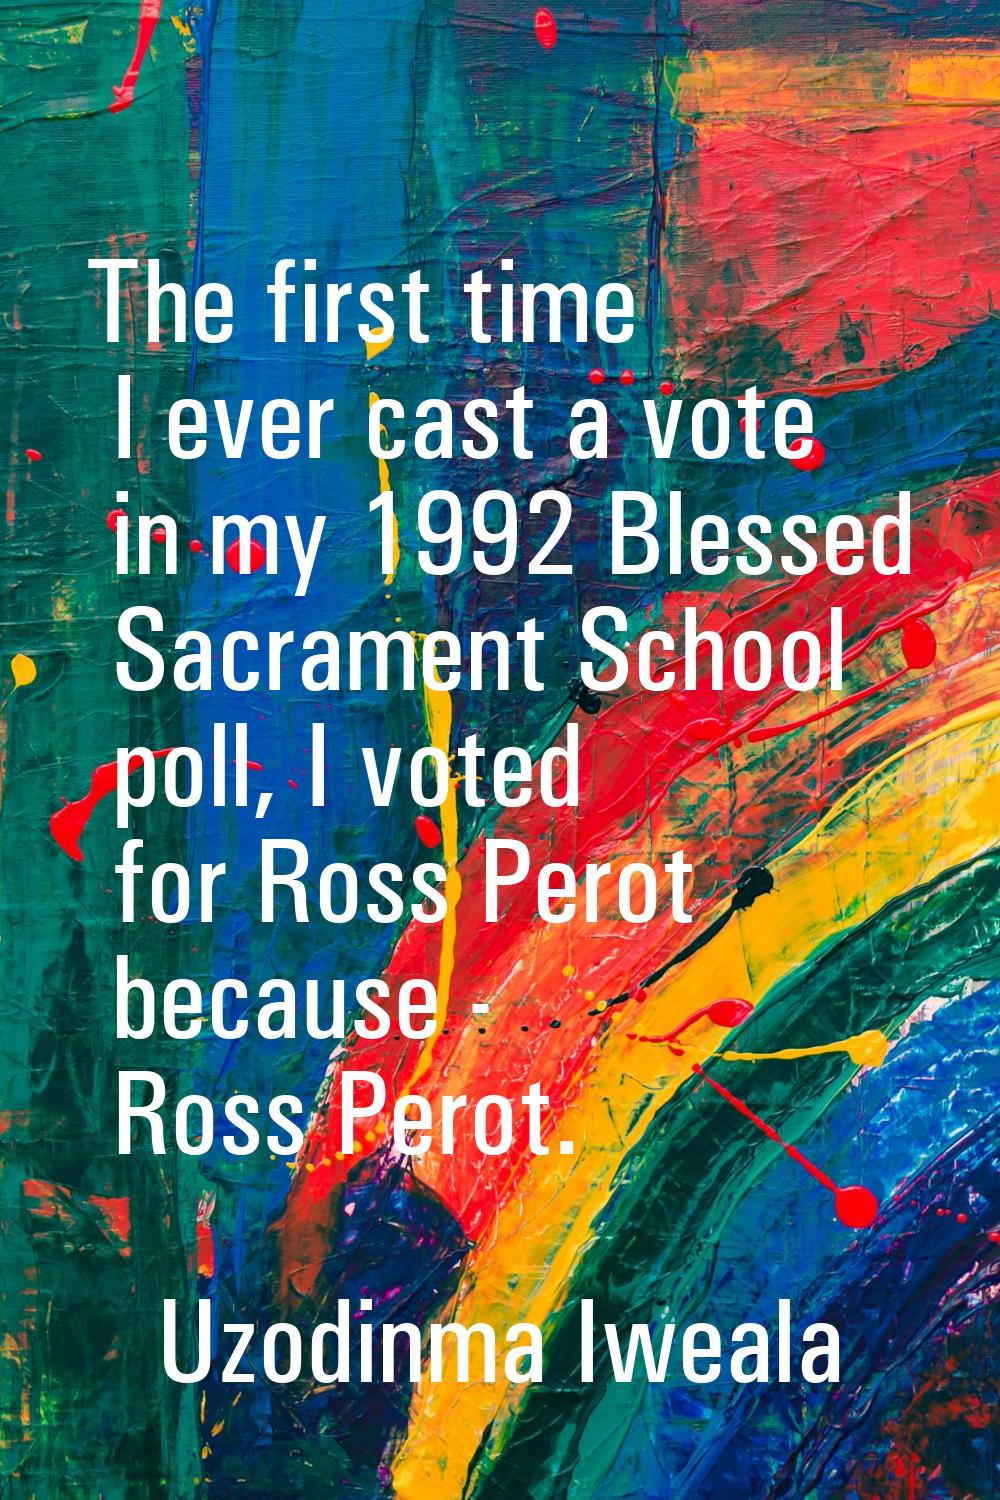 The first time I ever cast a vote in my 1992 Blessed Sacrament School poll, I voted for Ross Perot 